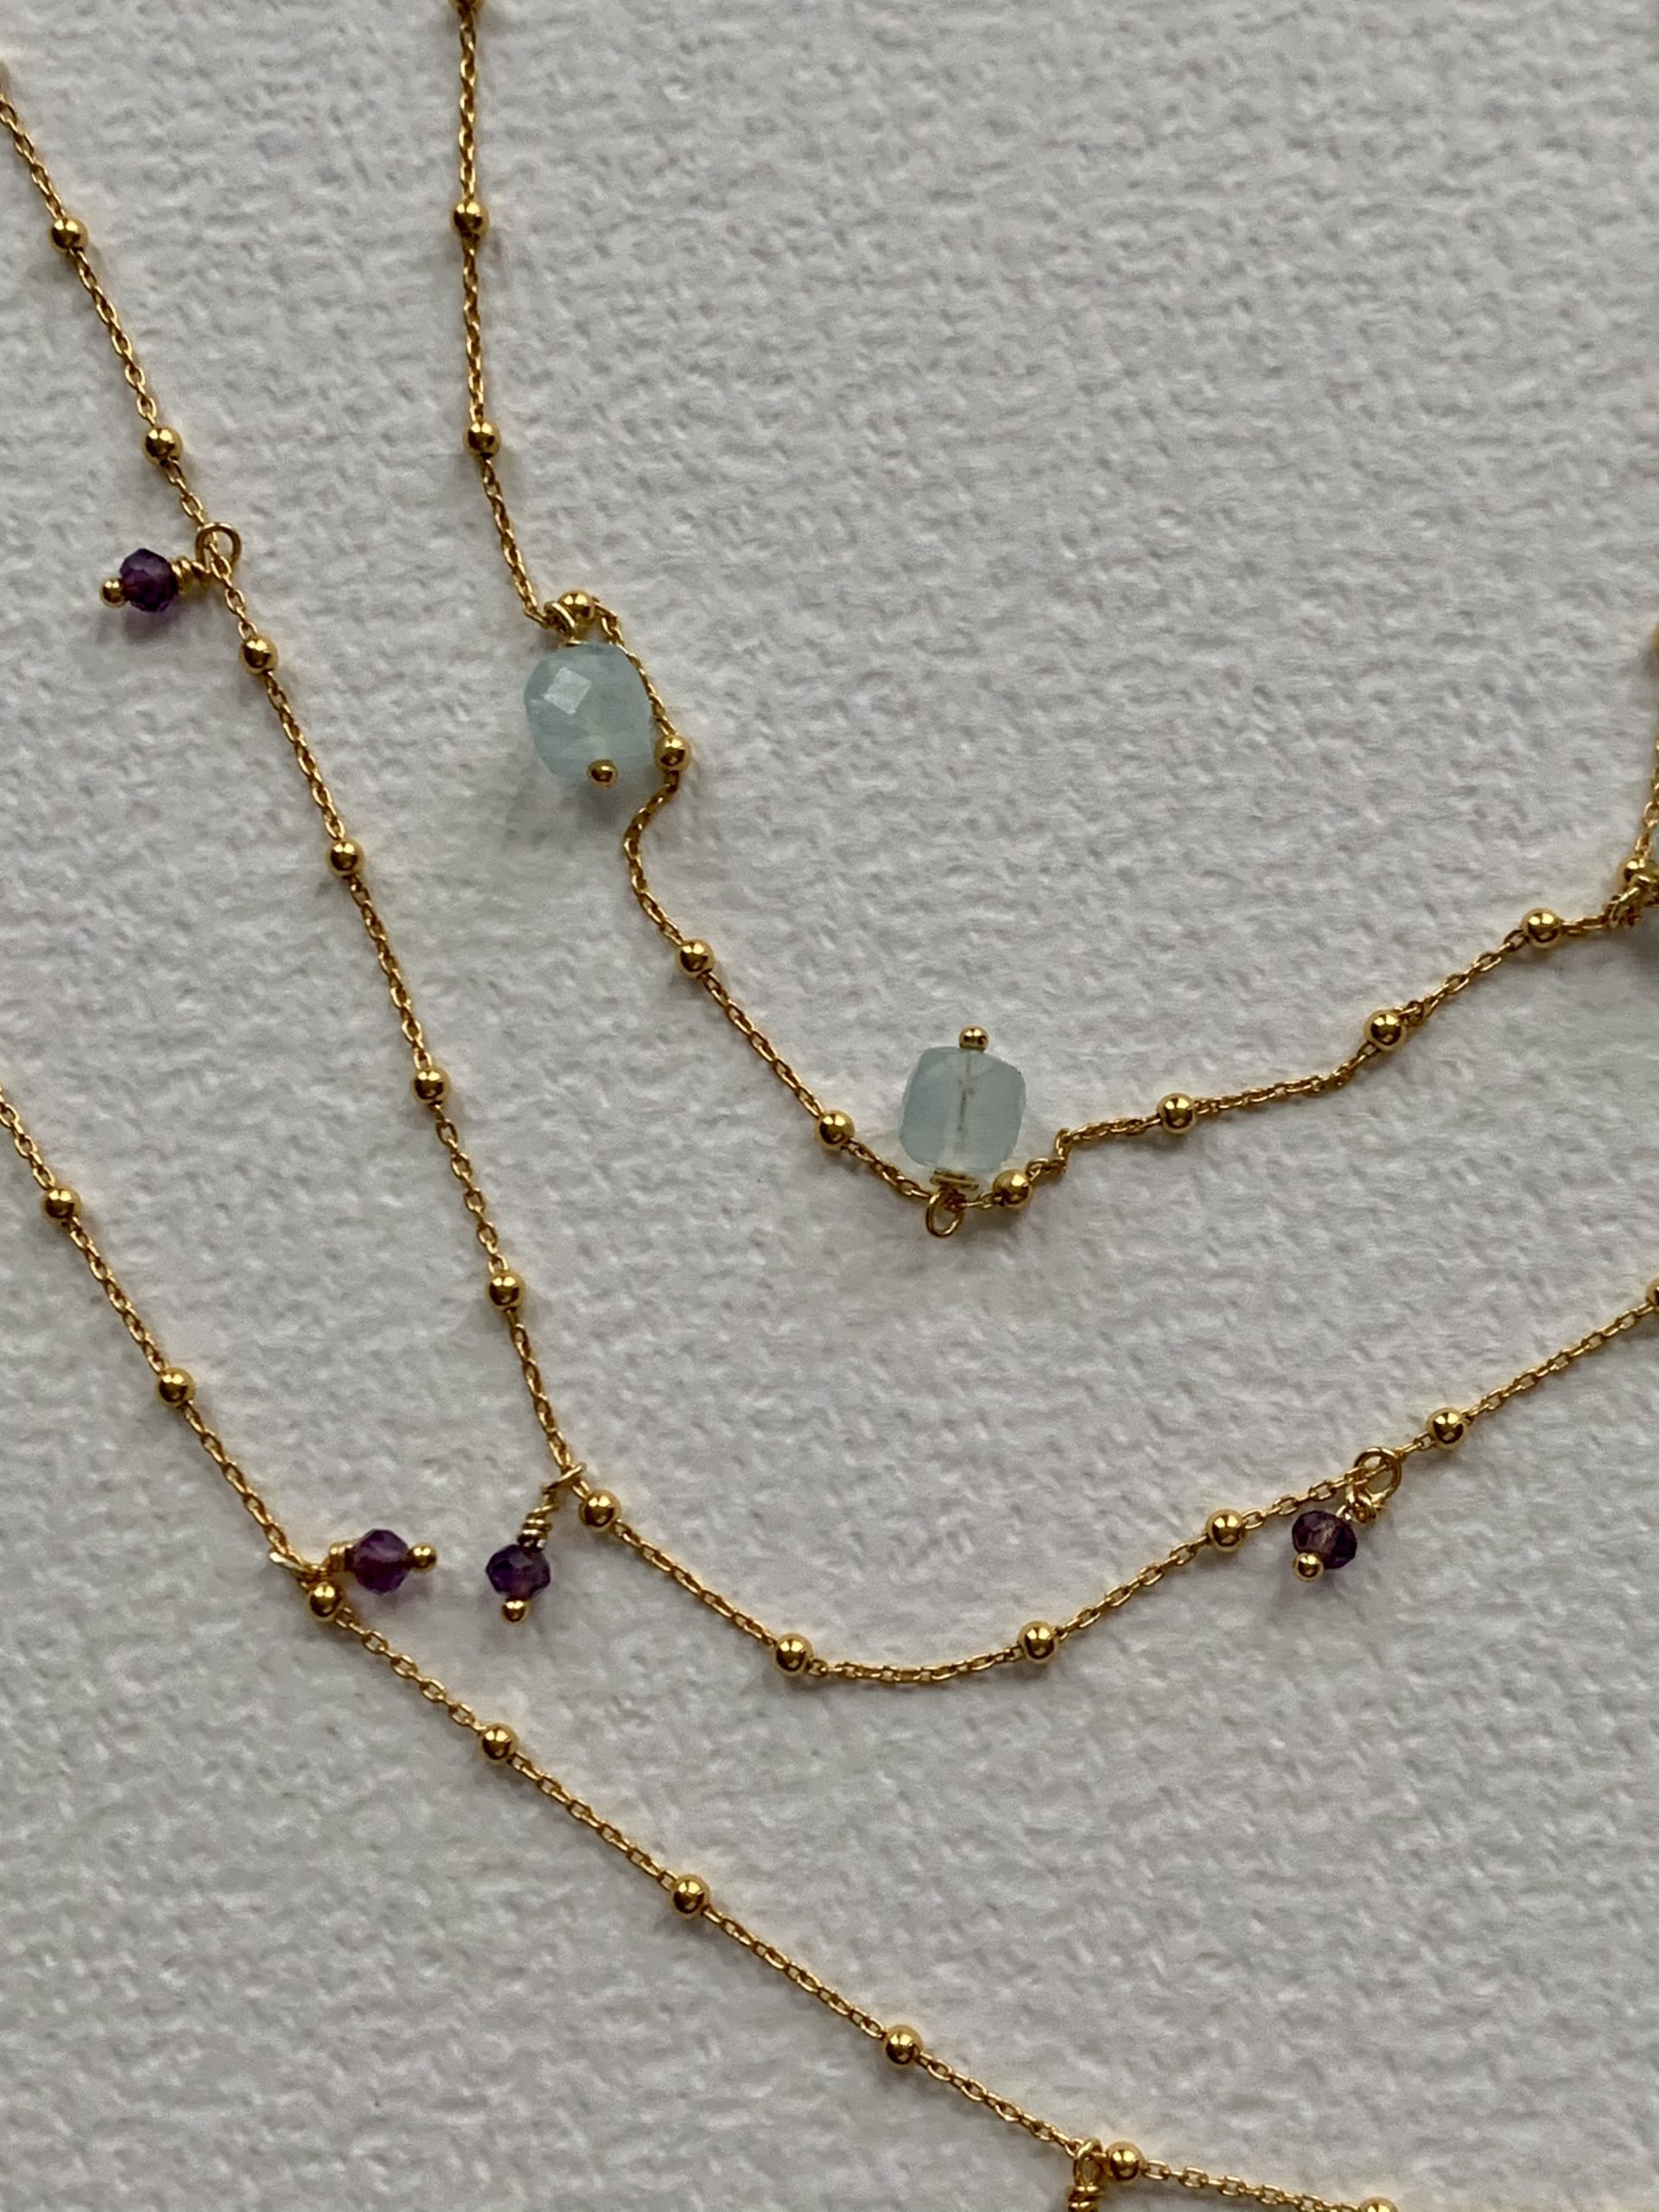 Gold plated silver and stones necklace